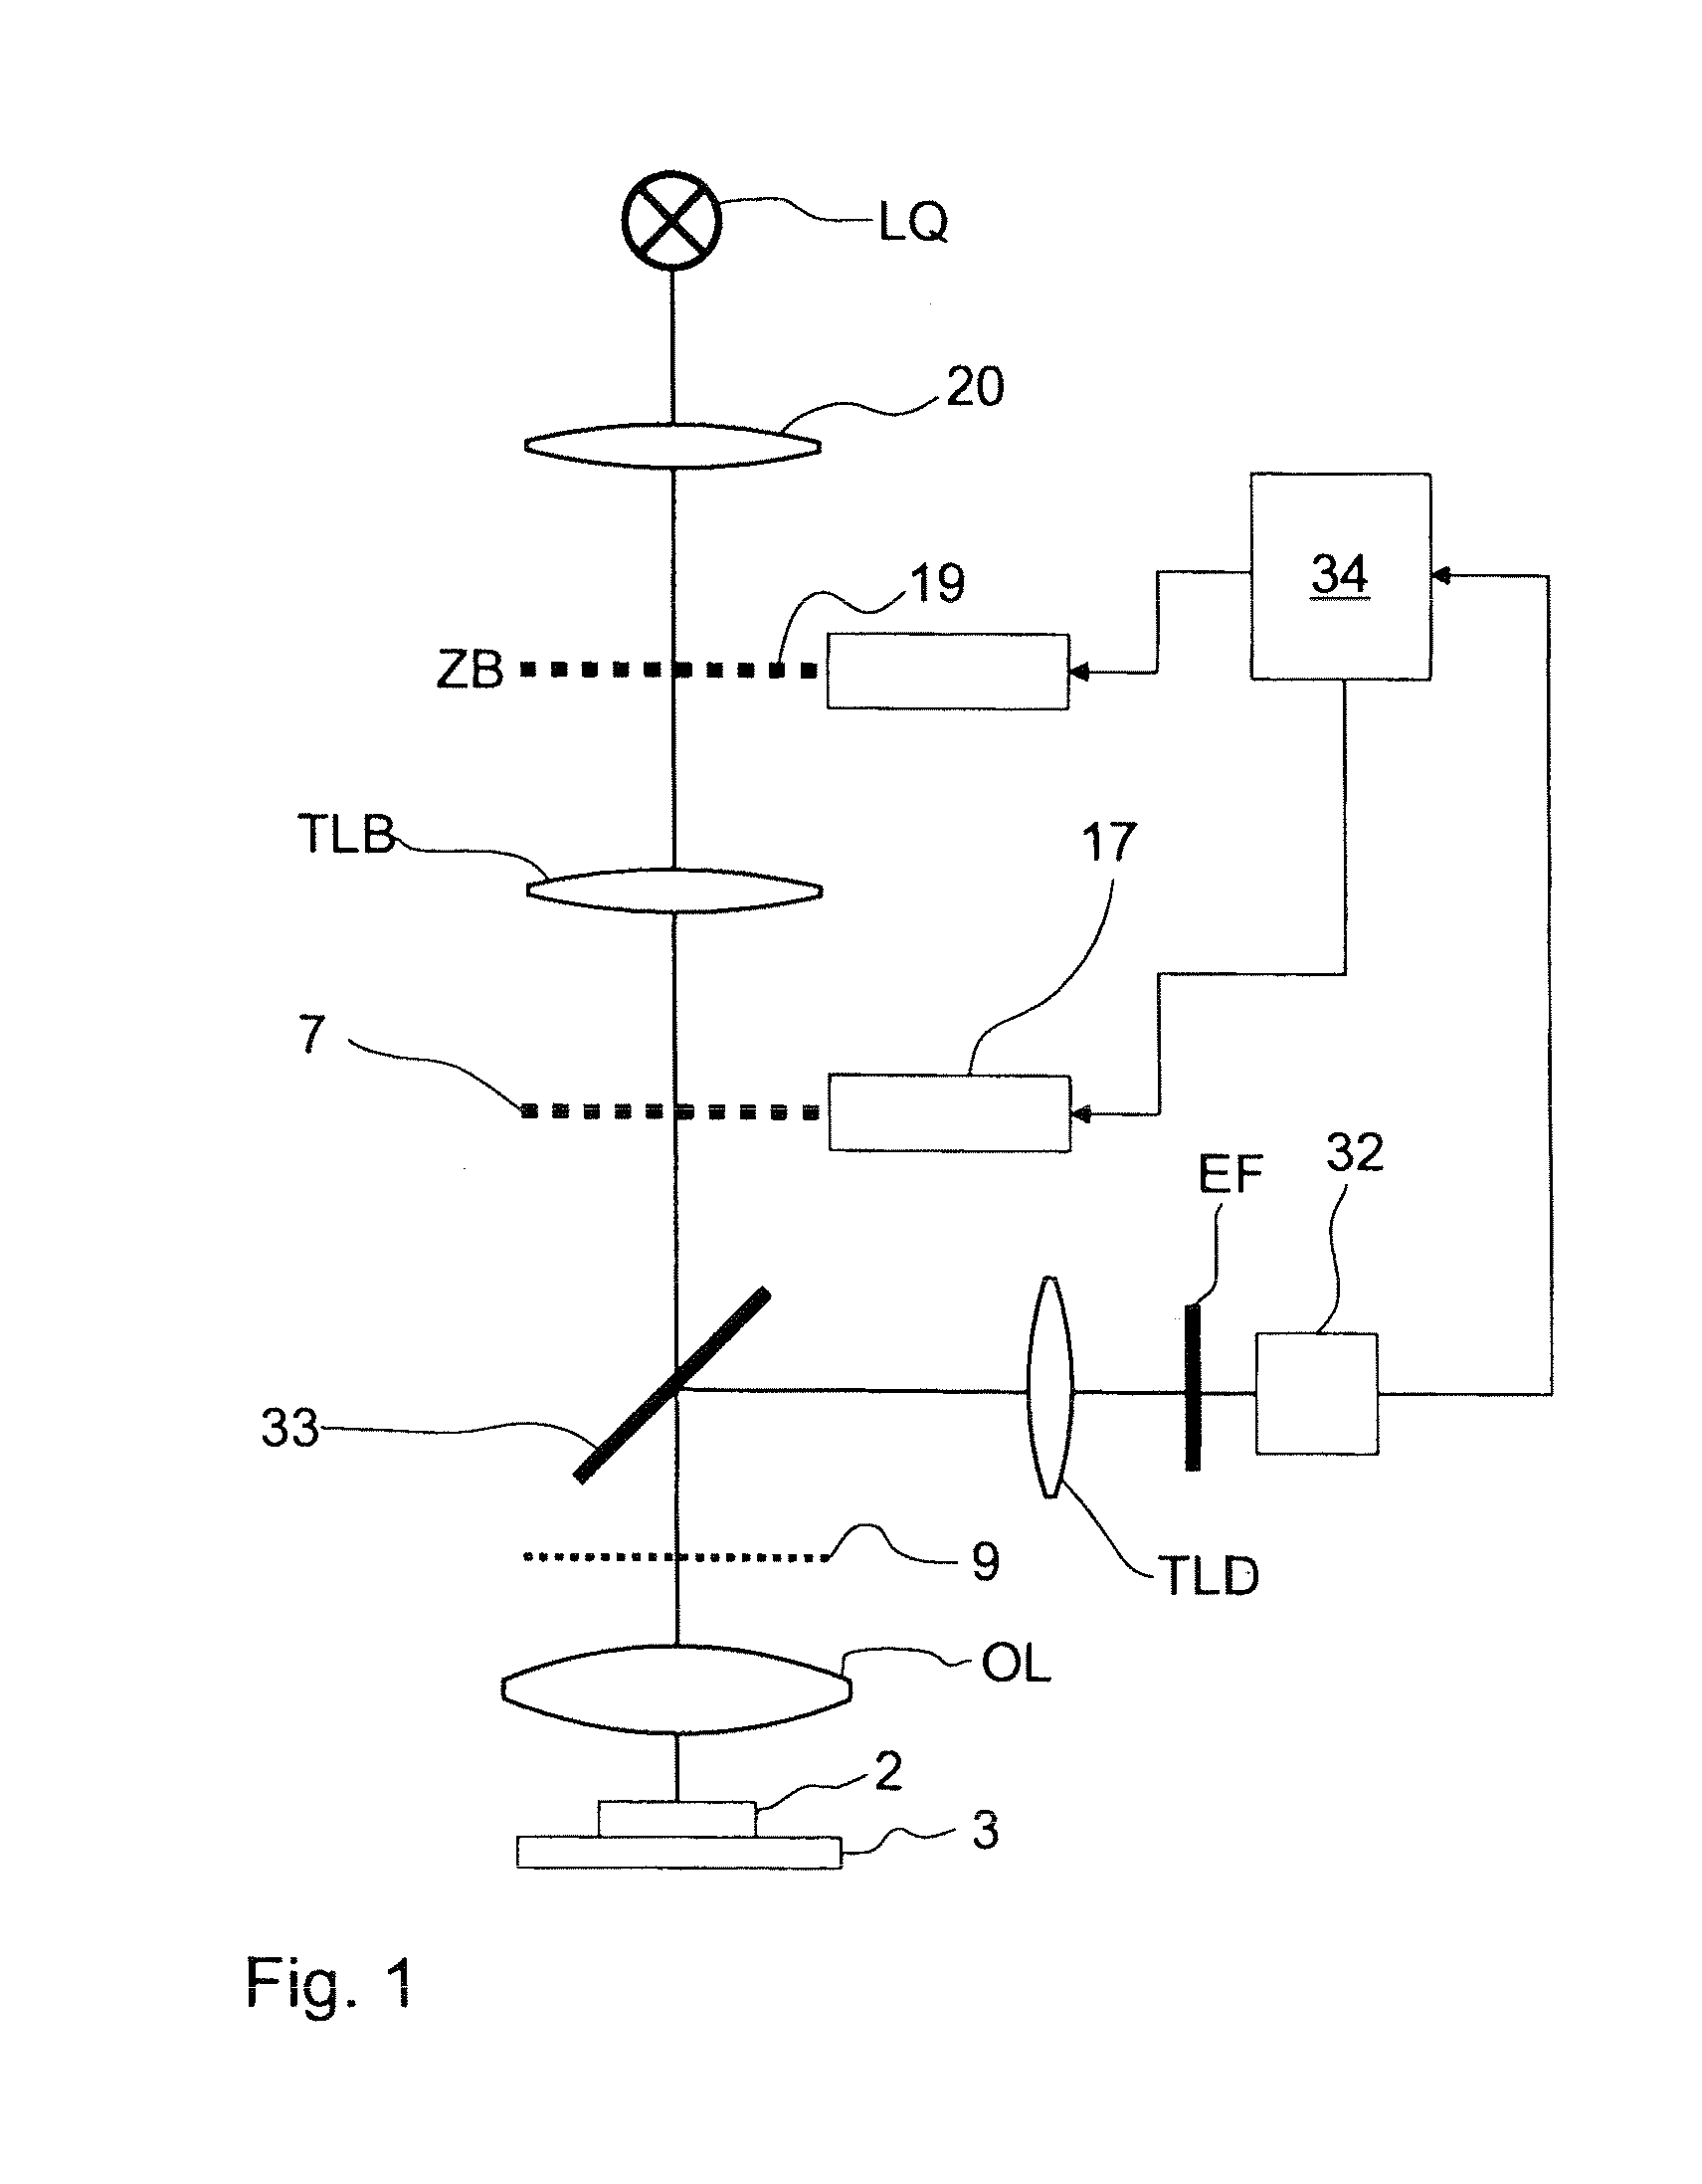 Methods and apparatuses for structured illumination microscopy